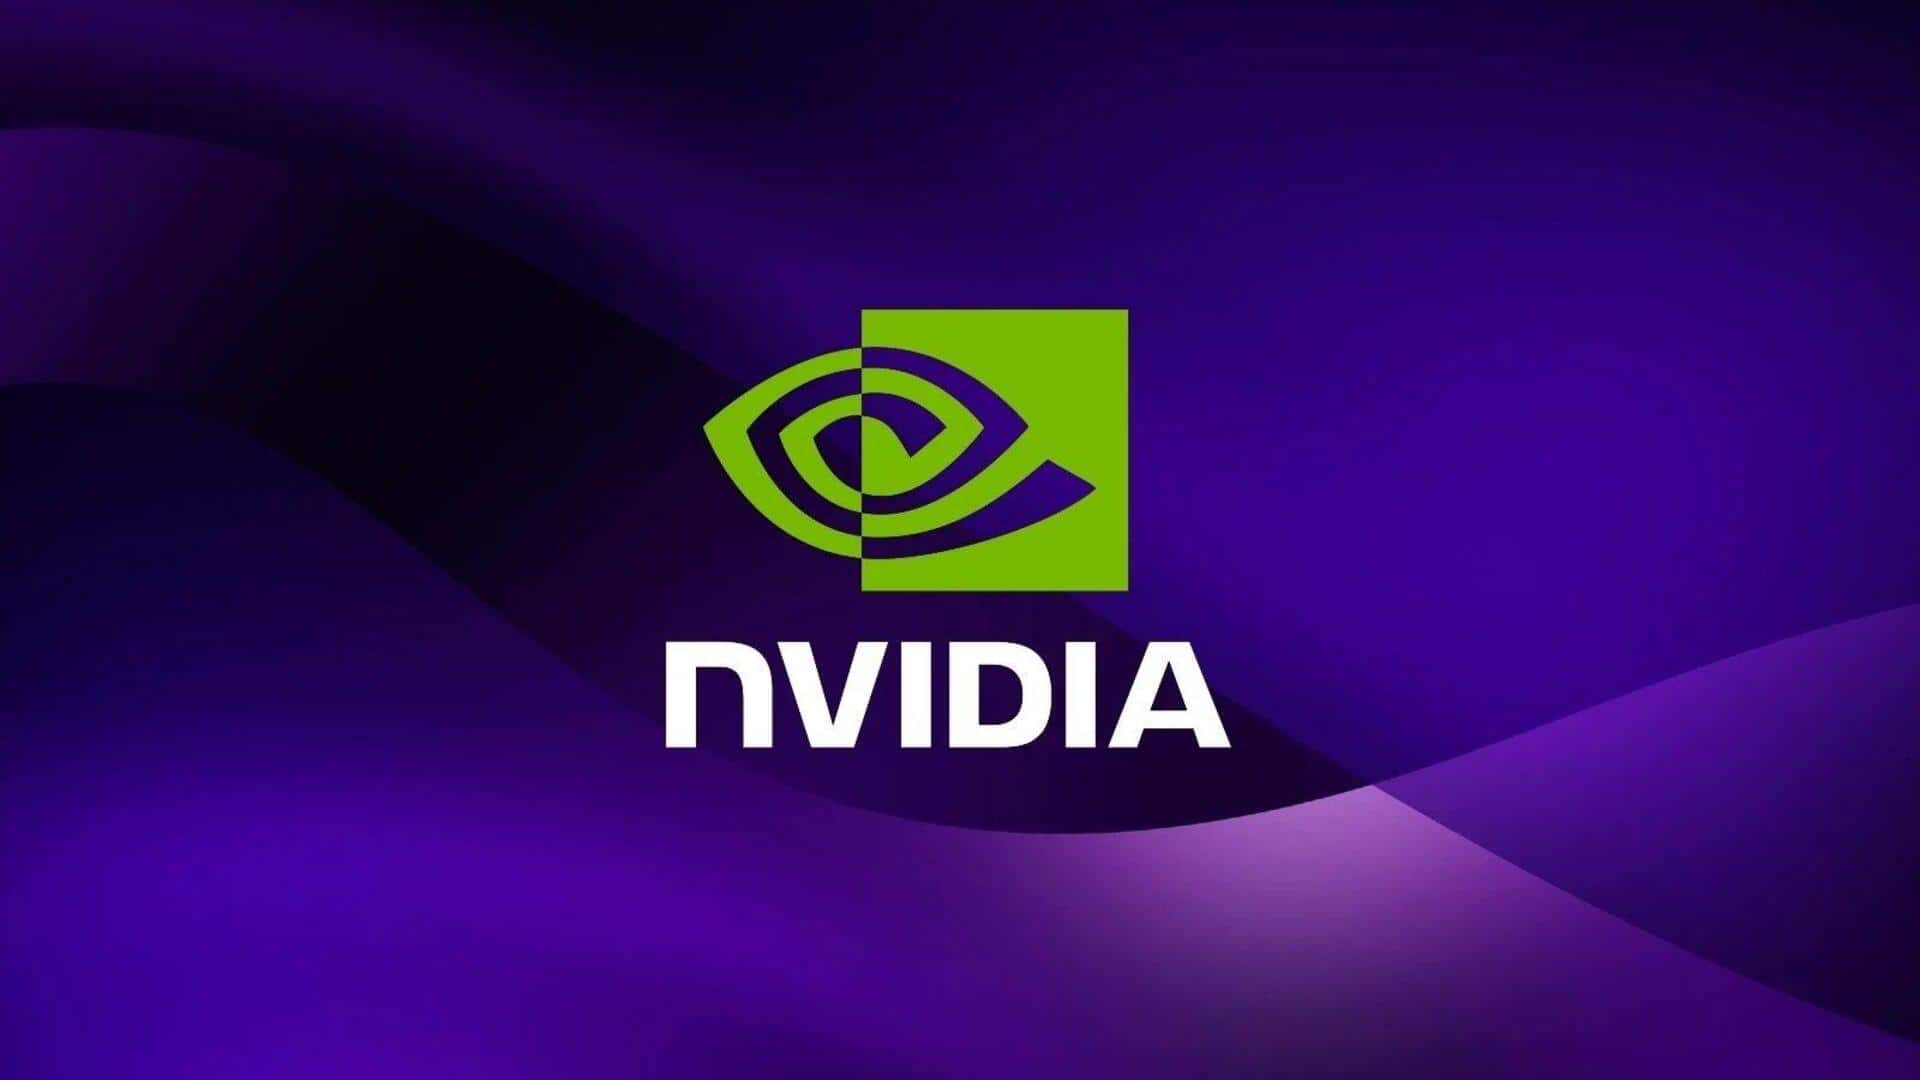 NVIDIA launches Earth-2 cloud platform to tackle climate change